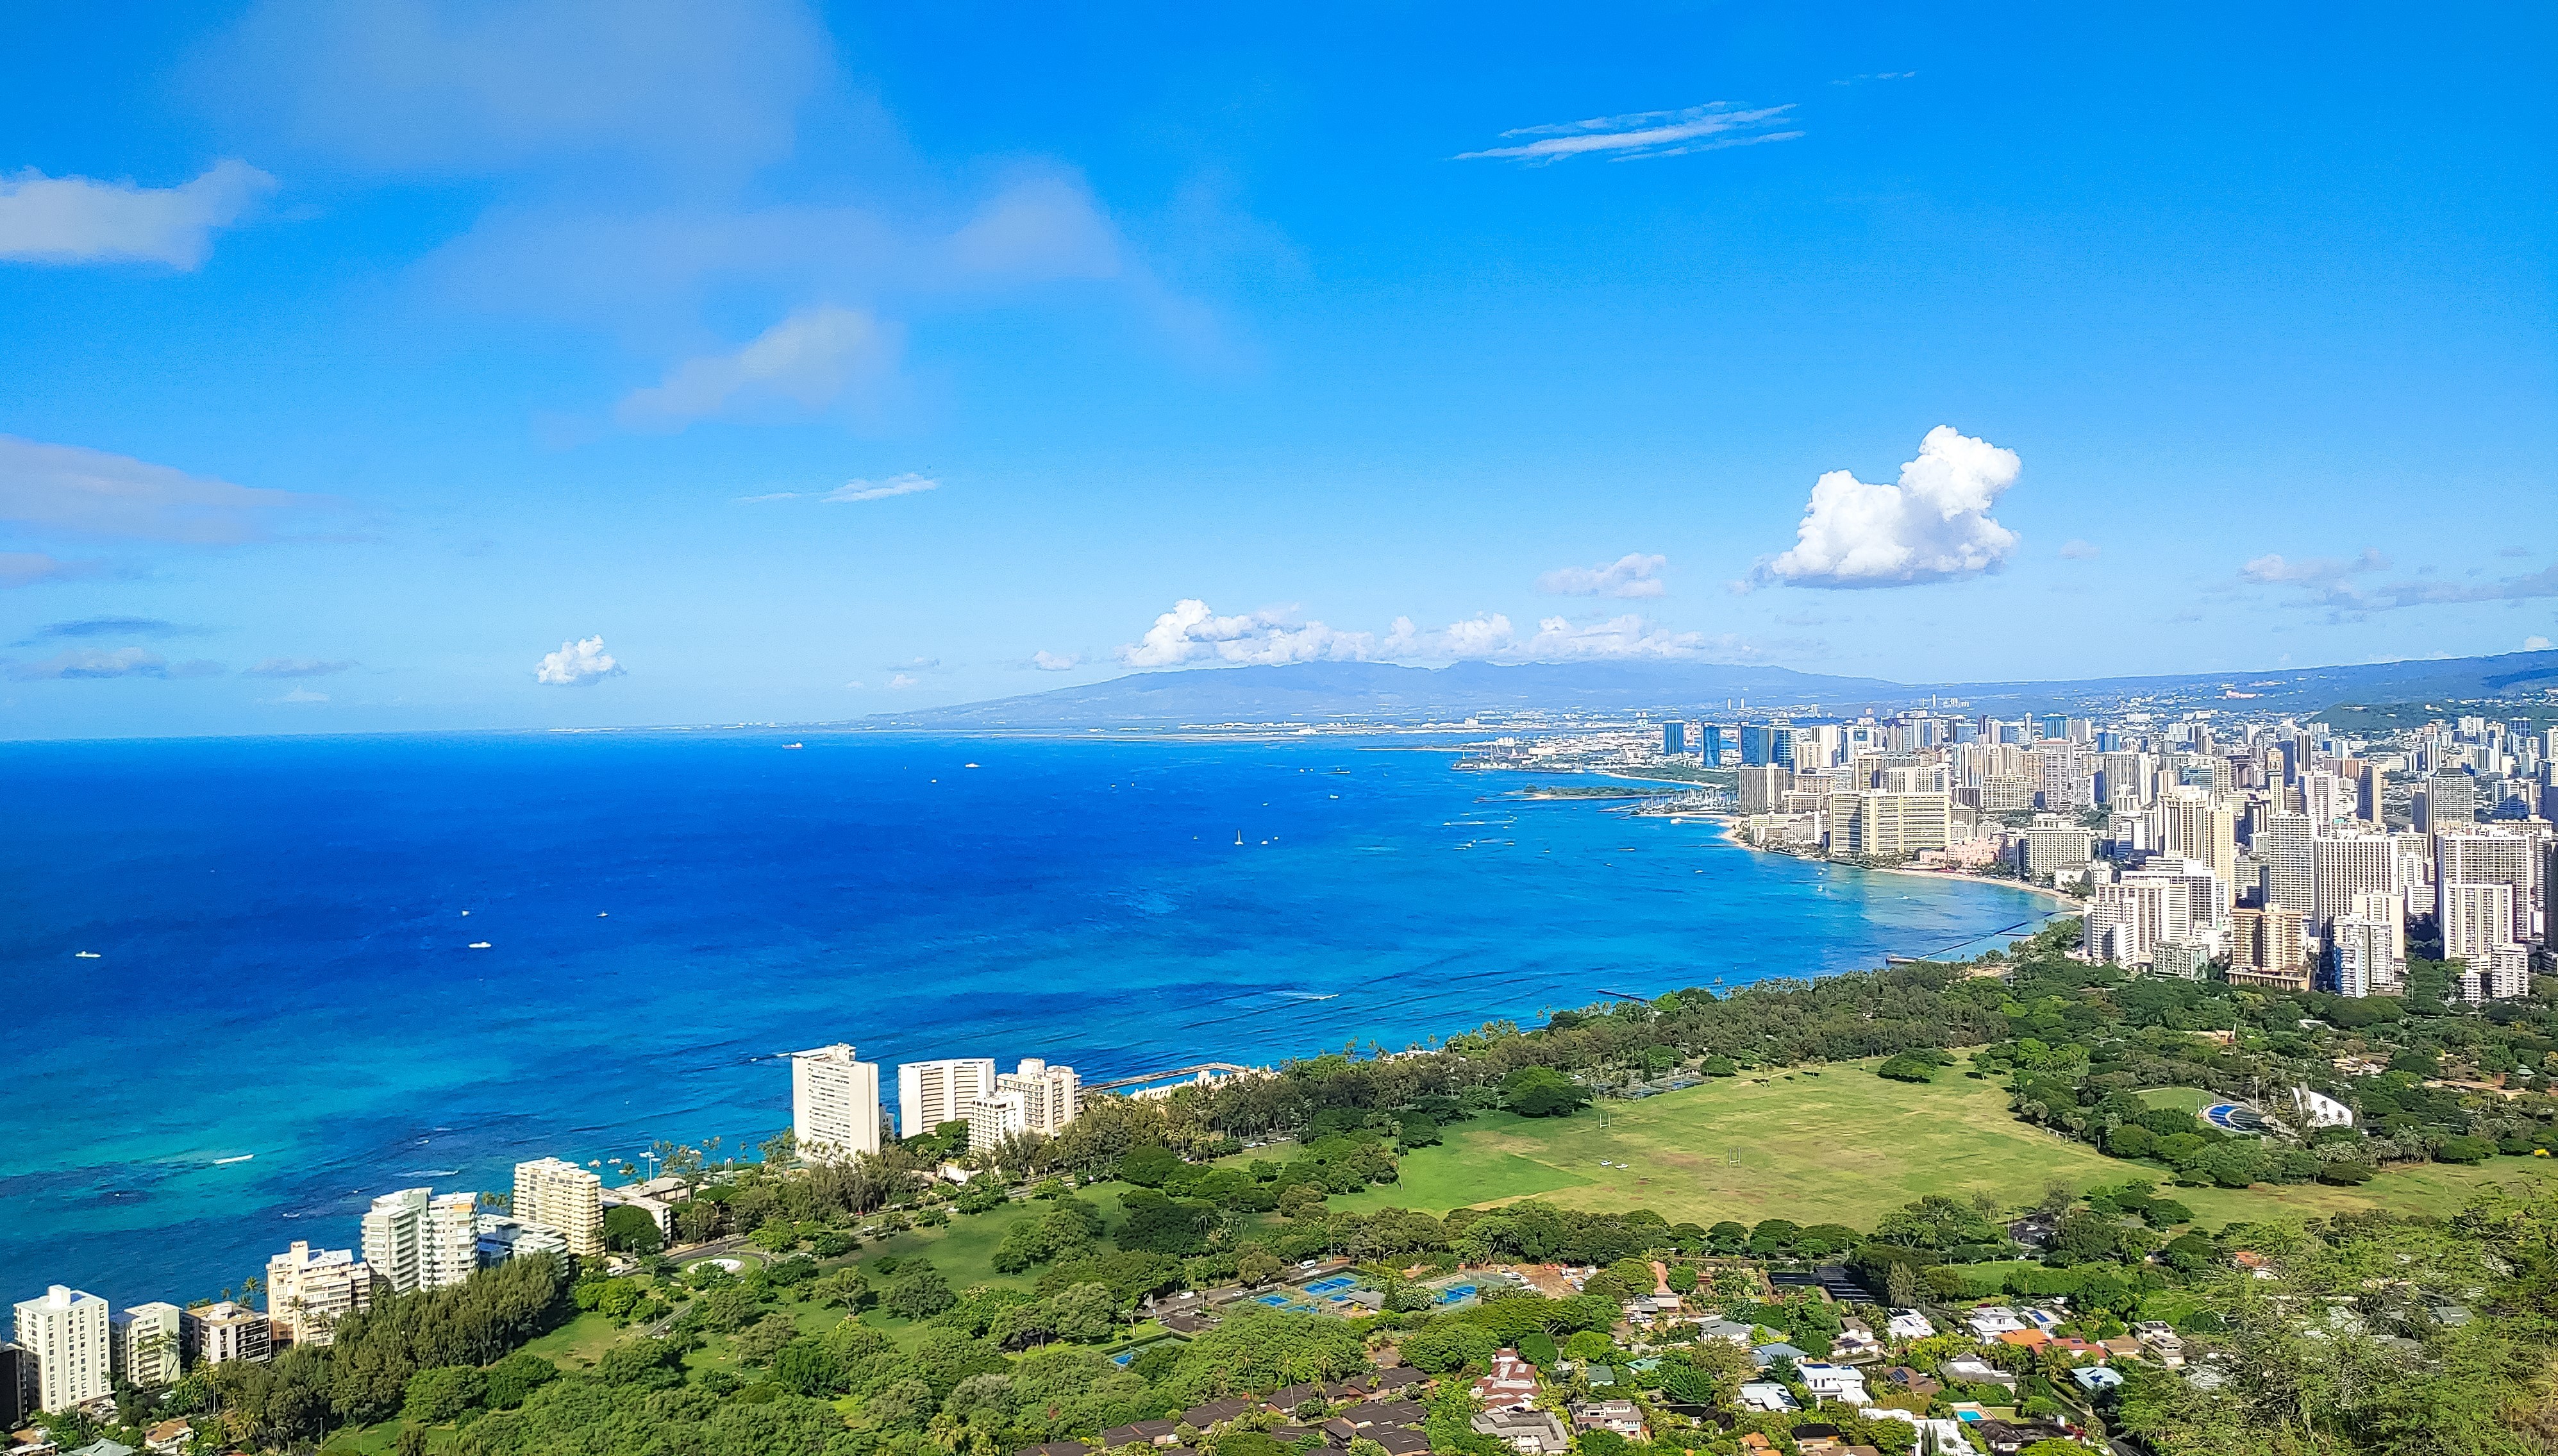 A wide-angle landscape photo taken by LG G8X ThinQ captures the beautiful blue sea and green hills of a town by the beach in Honolulu, Hawaii on a sunny day.